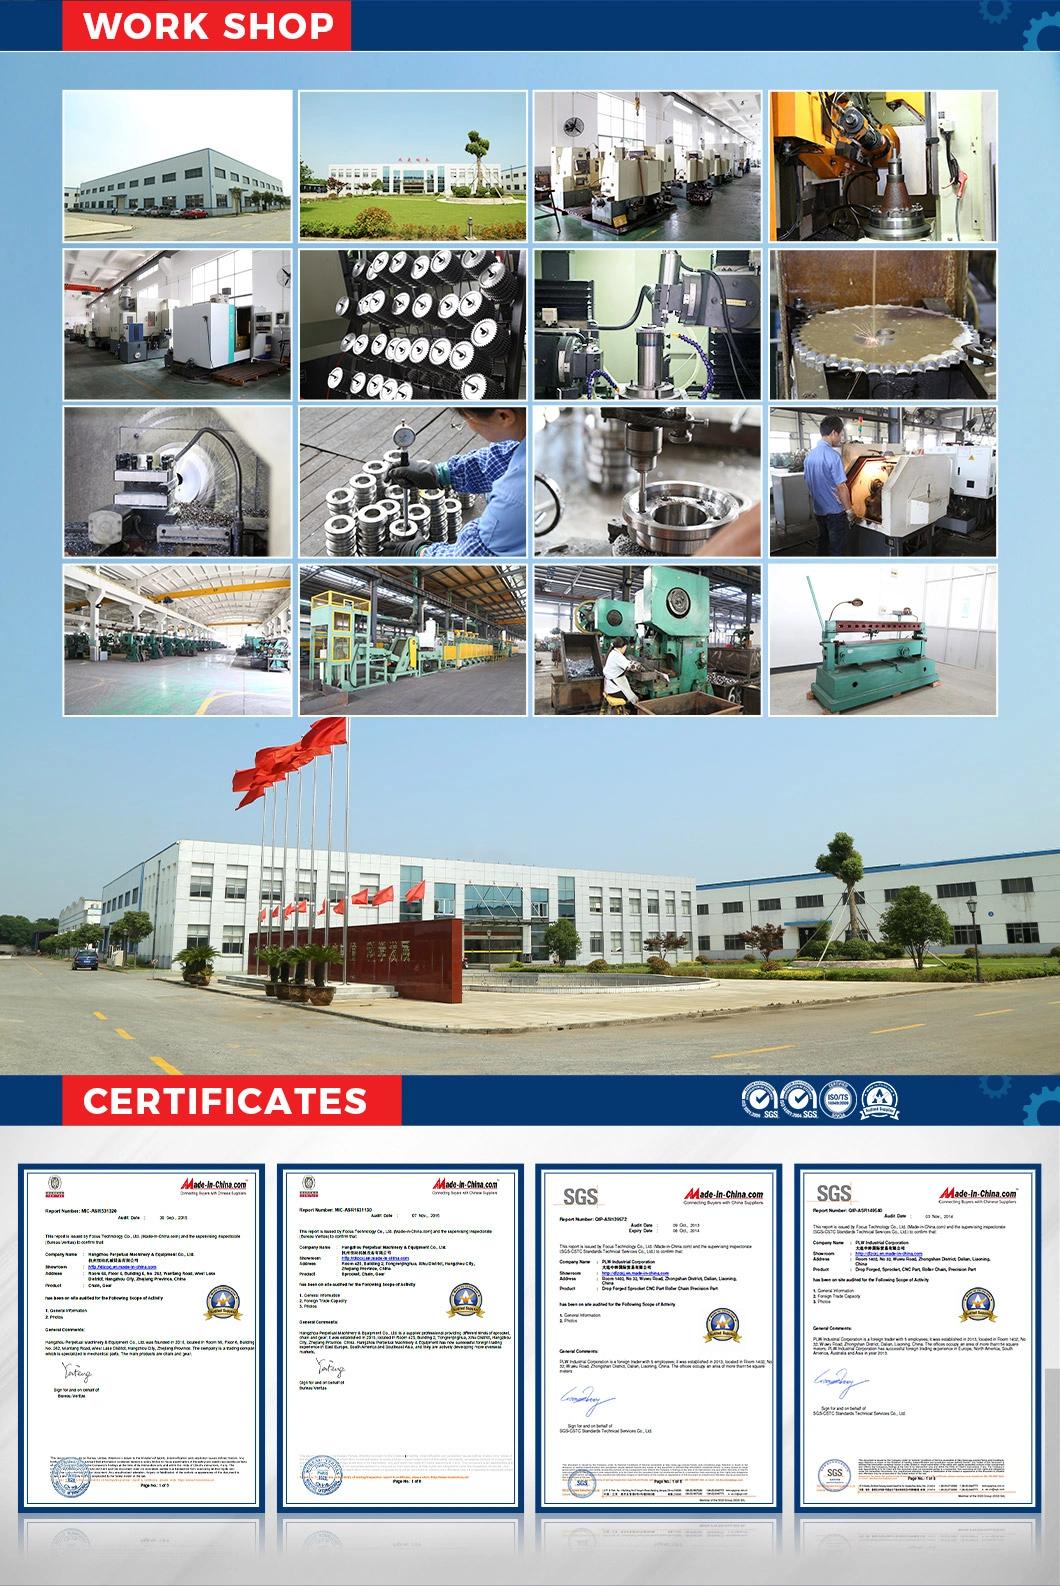 Made-to-Order High Precision Harvester Spare Parts Agricultural Chain